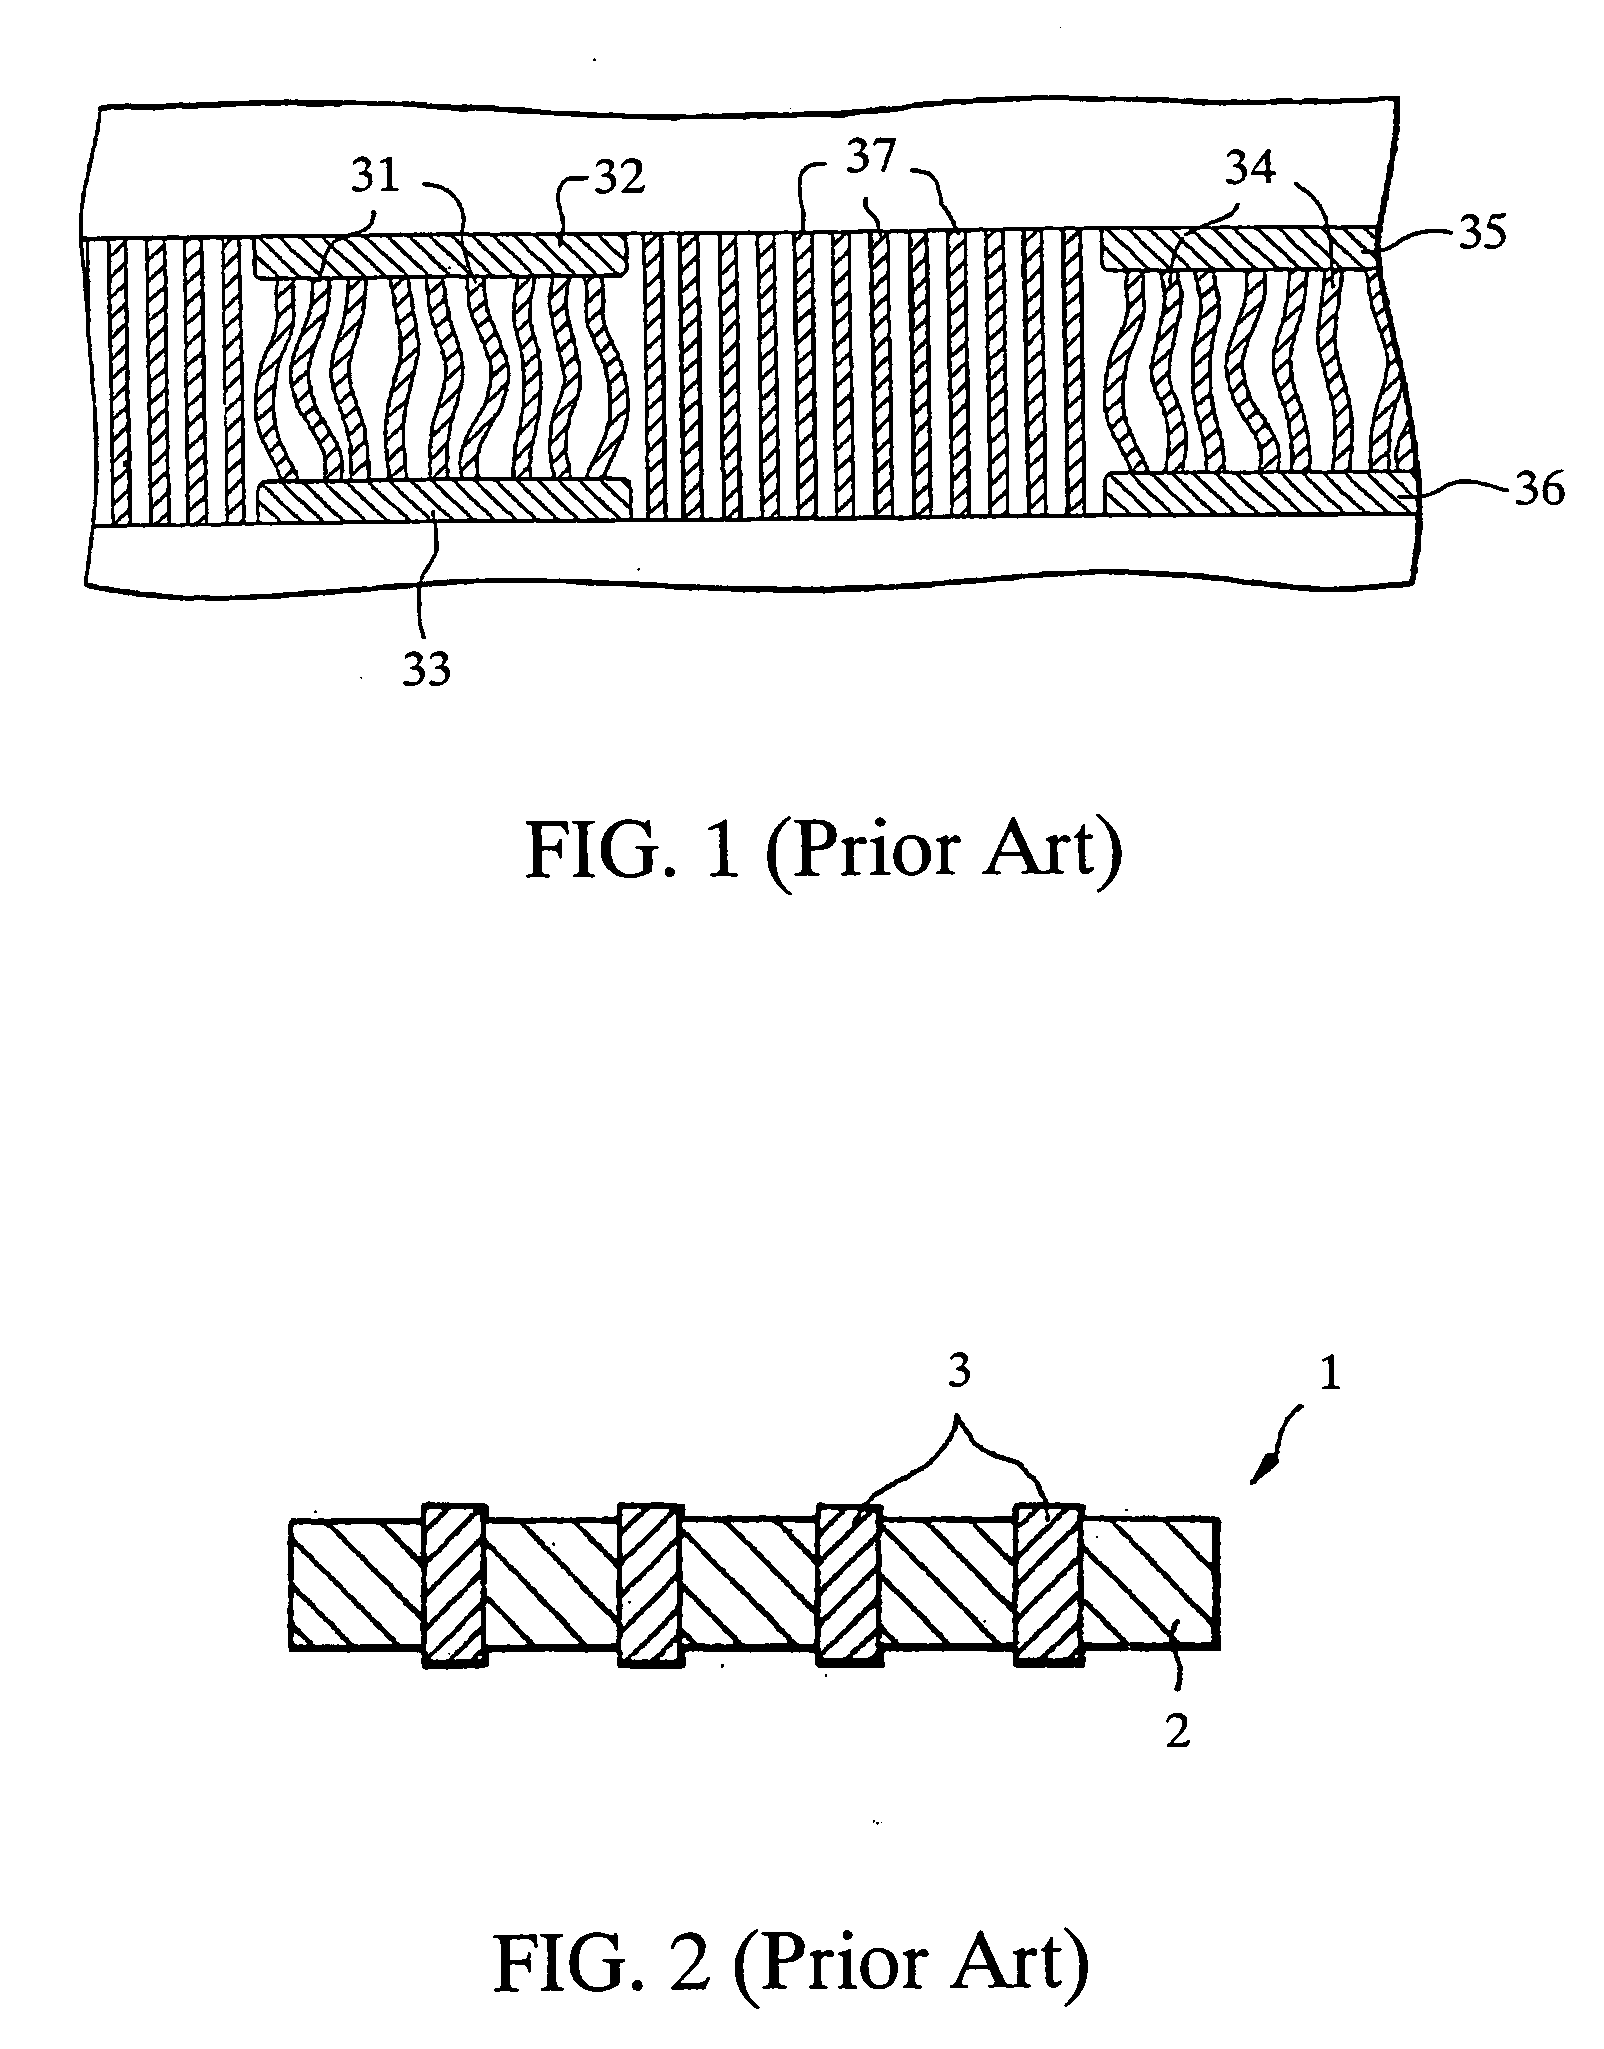 Structure of polymer-matrix conductive film and method for fabricating the same